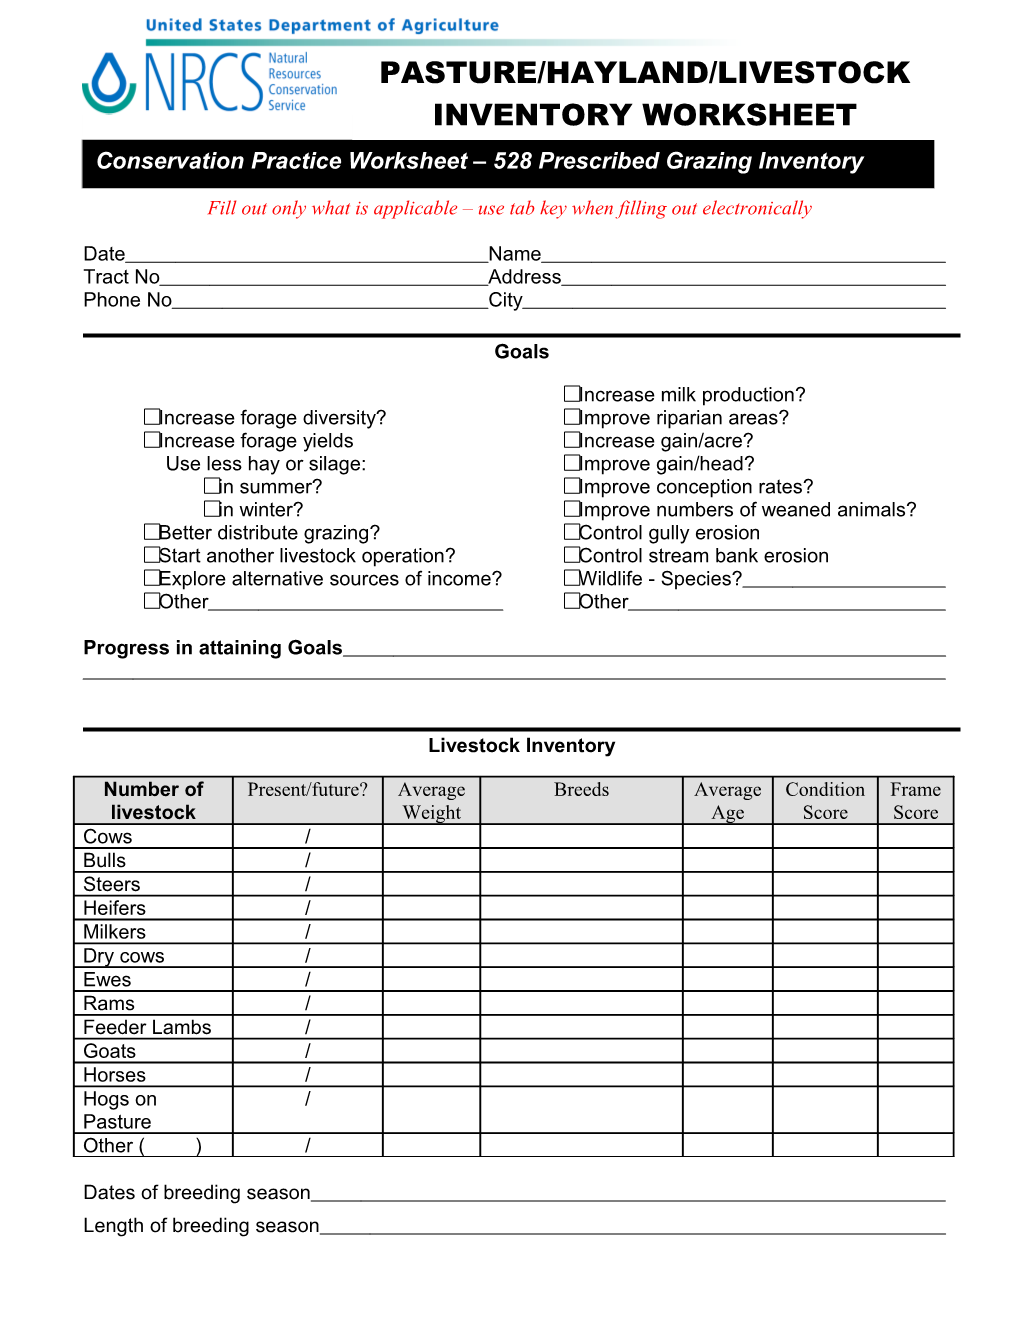 Fill out Only What Is Applicable Use Tab Key When Filling out Electronically